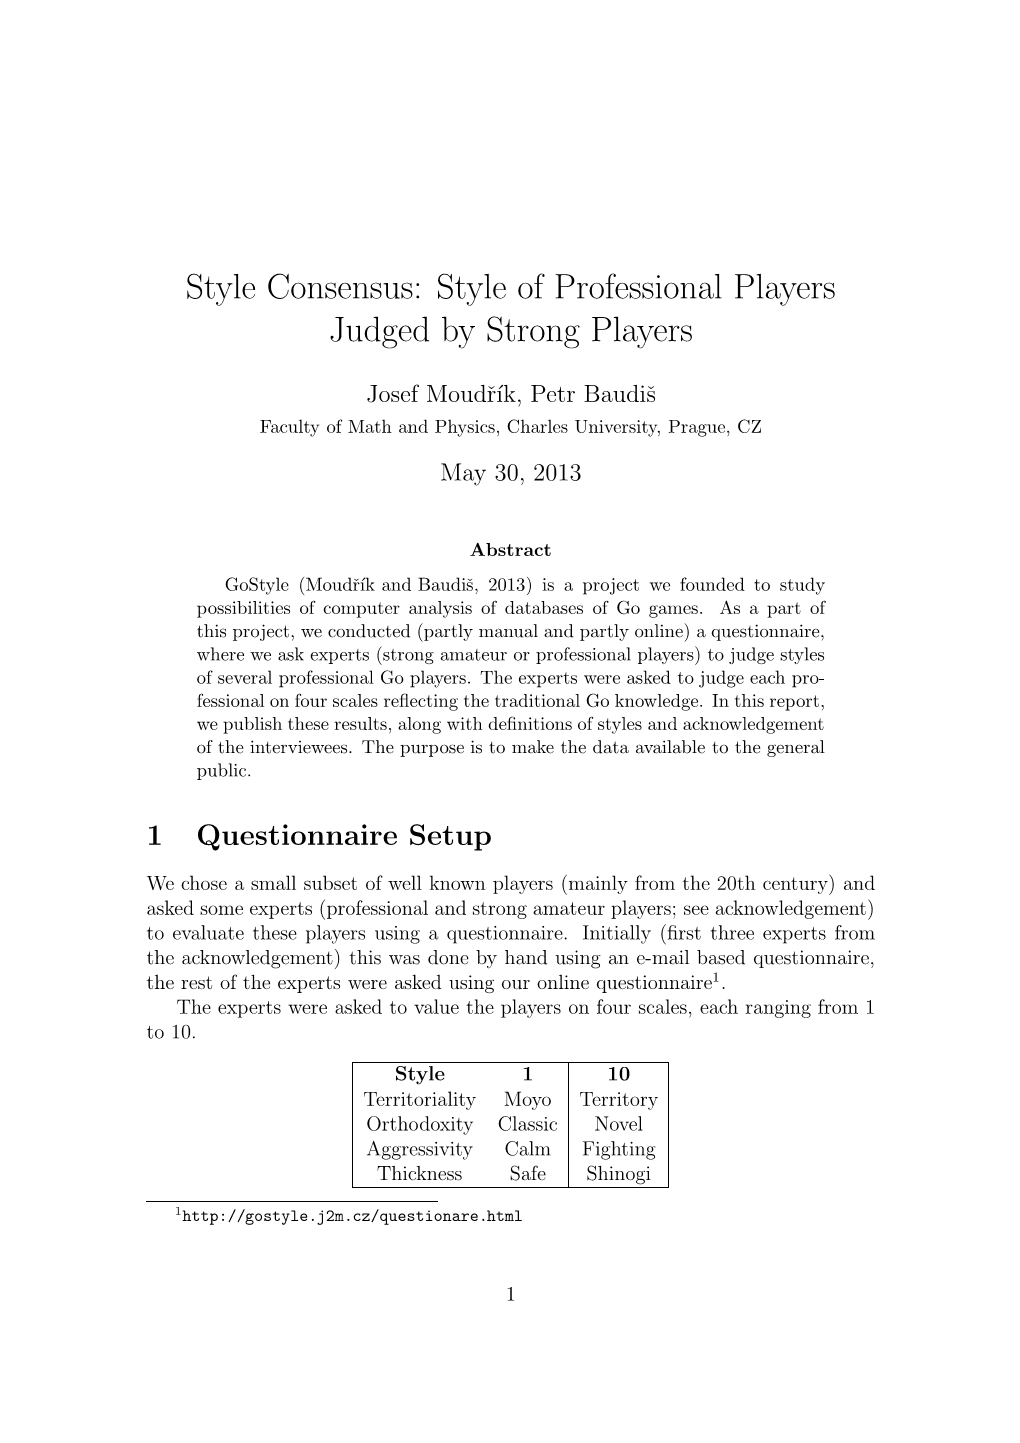 Style Consensus: Style of Professional Players Judged by Strong Players